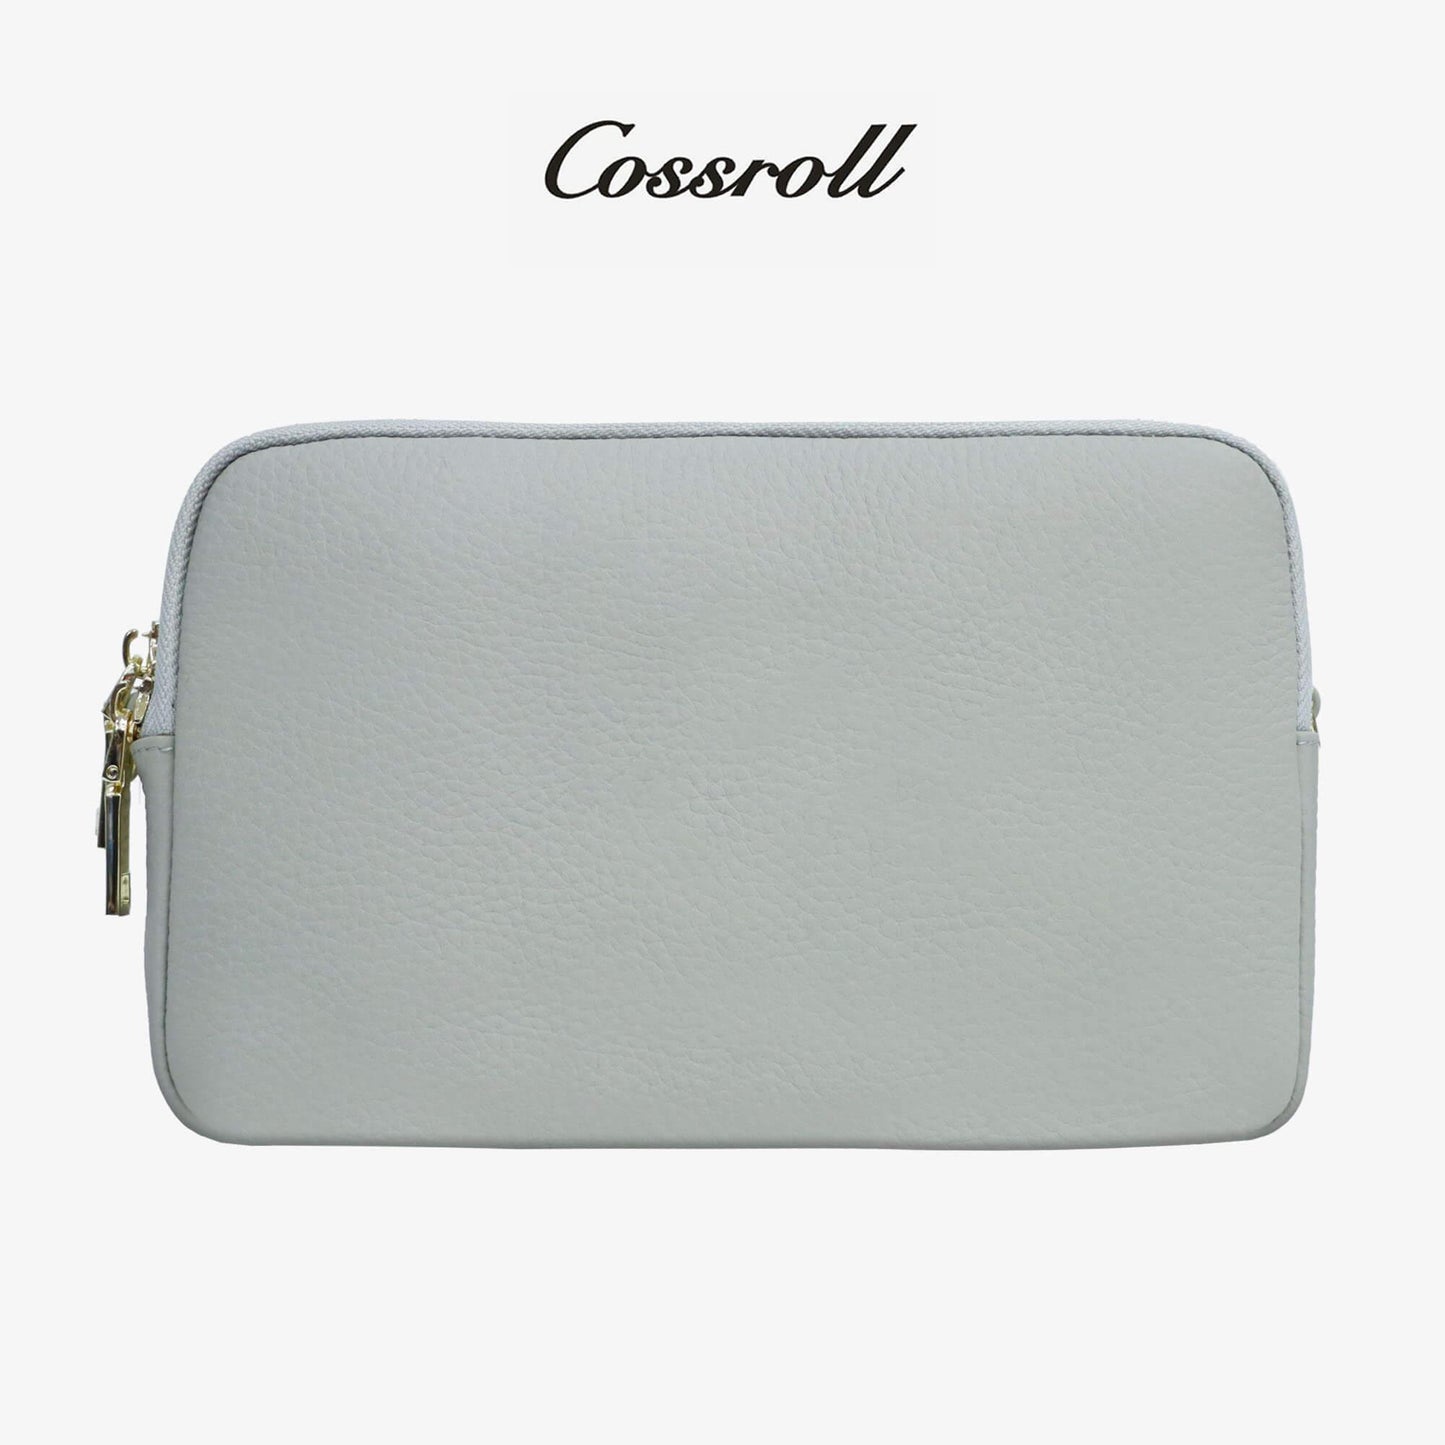 Zipper Crossbody Leather Bag For Wholesale - cossroll.leather